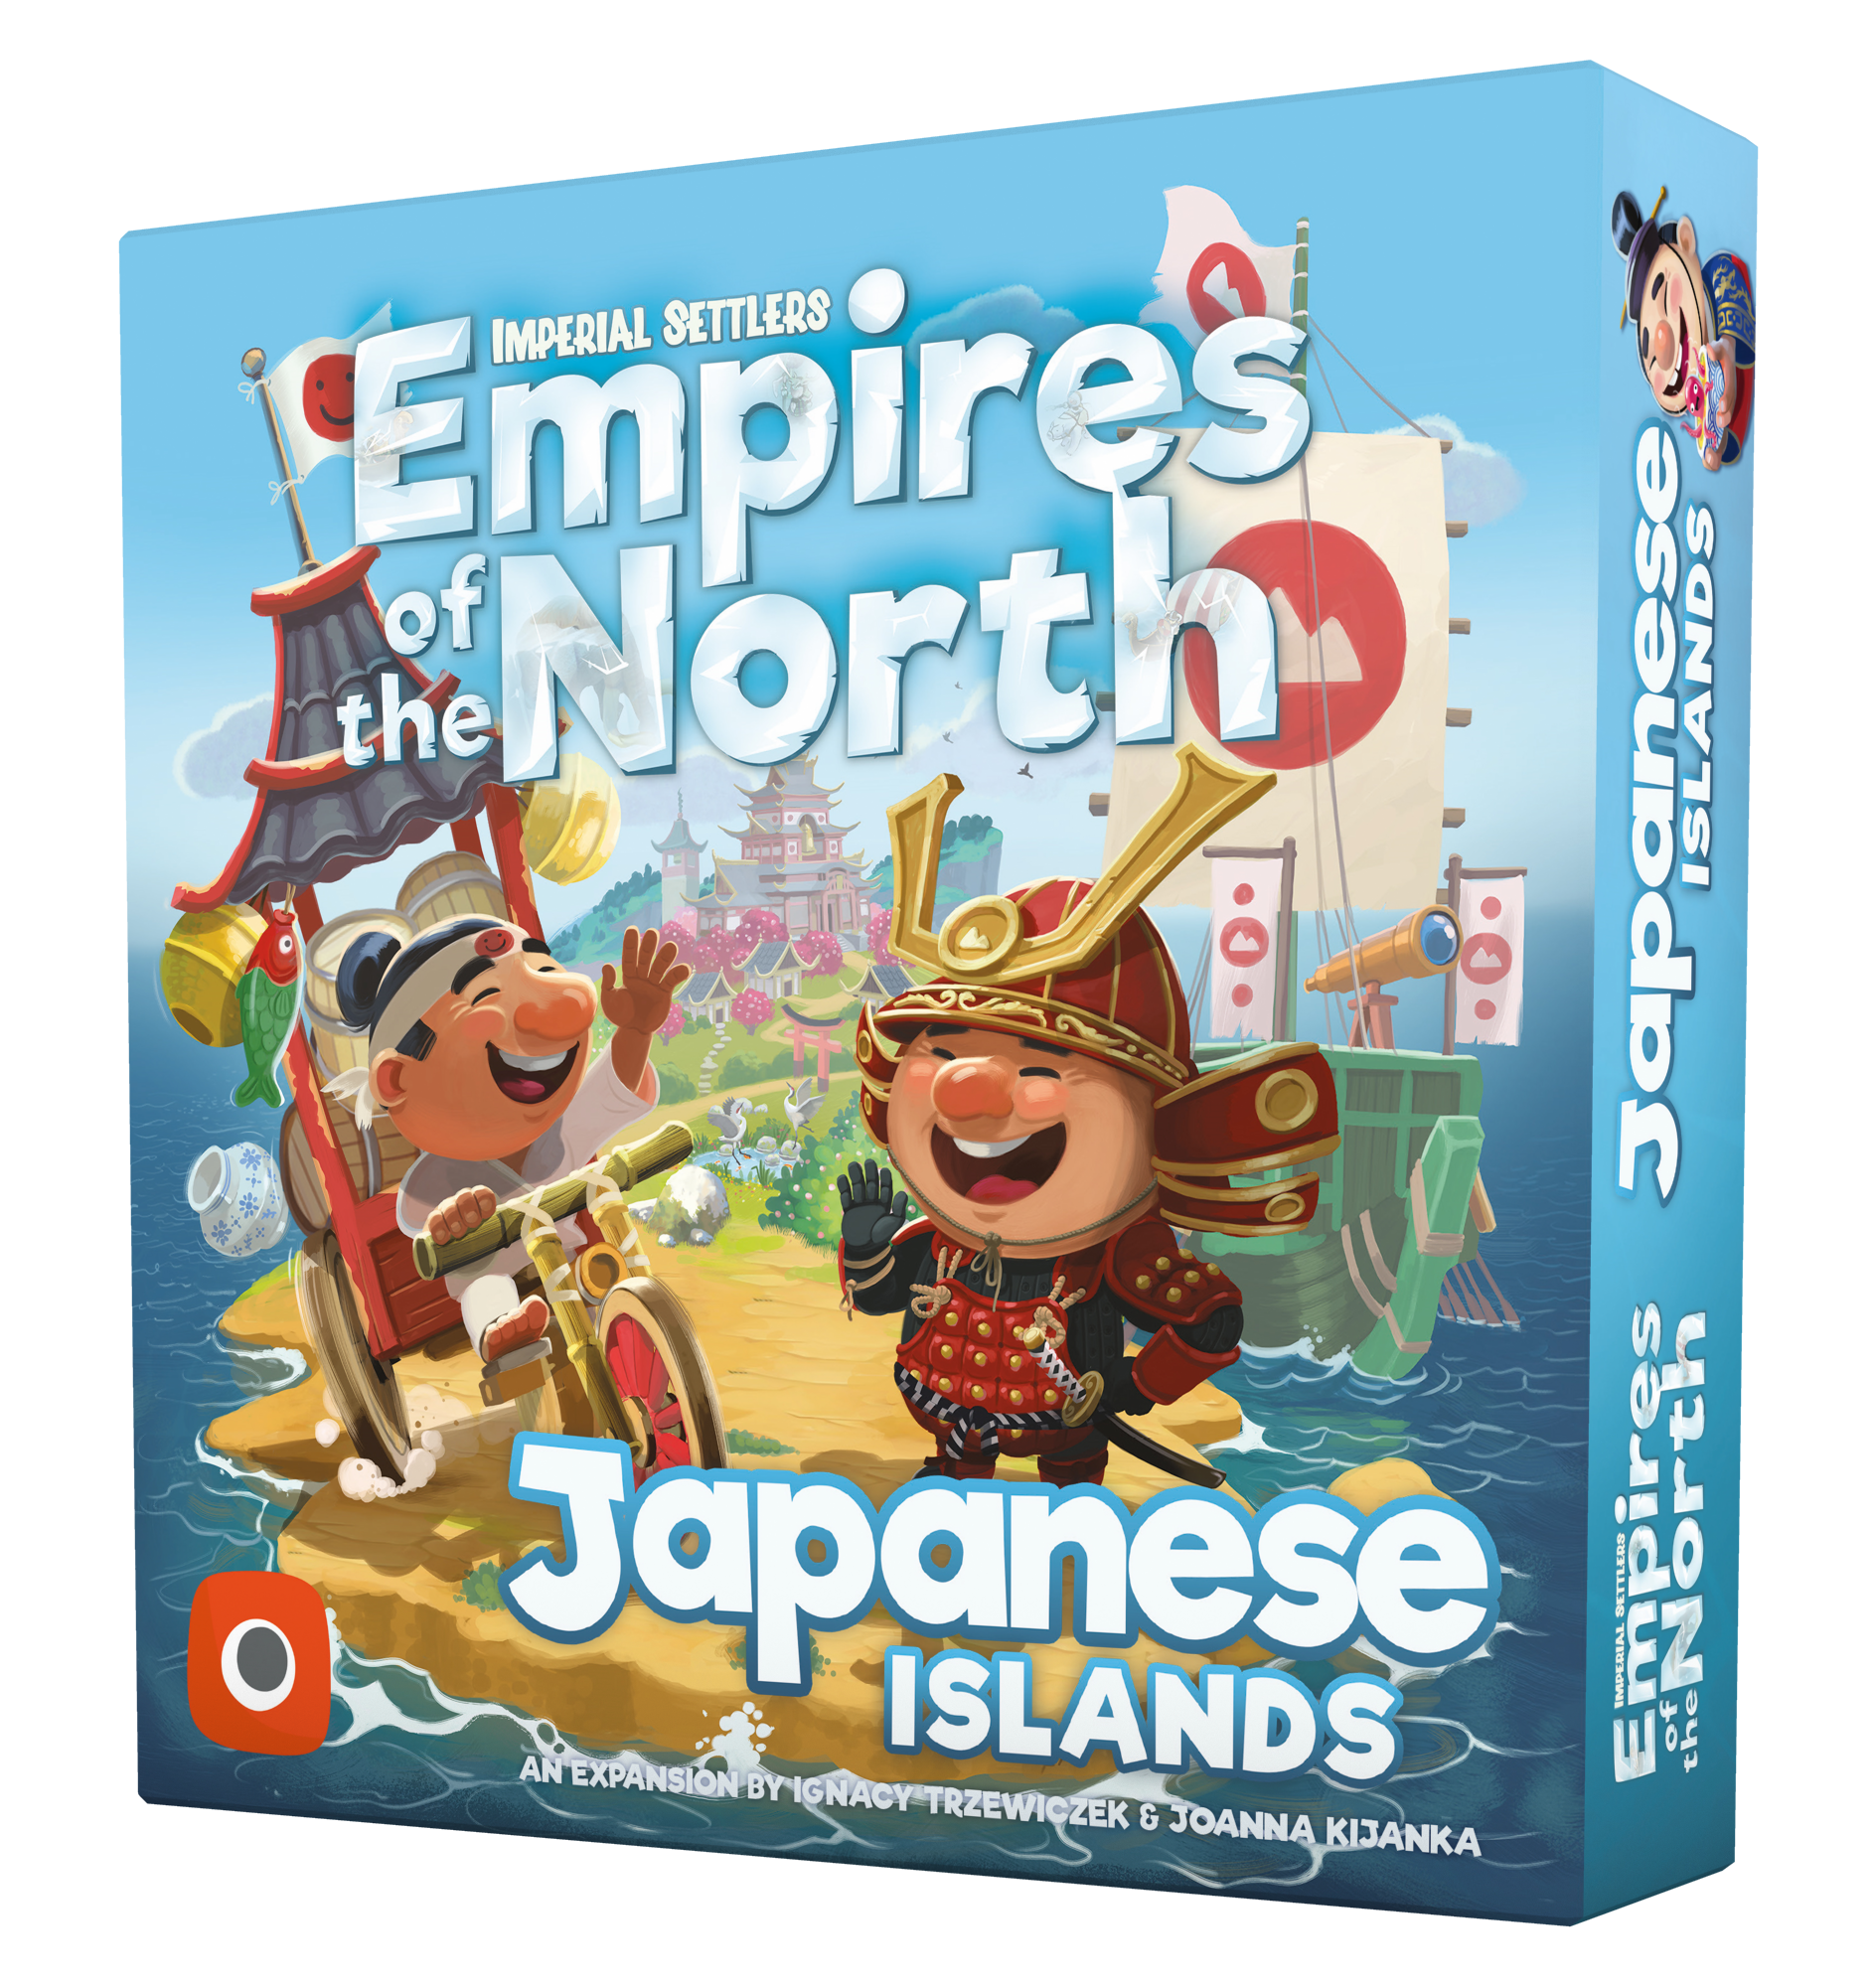 Empires of the North: Japanese Islands